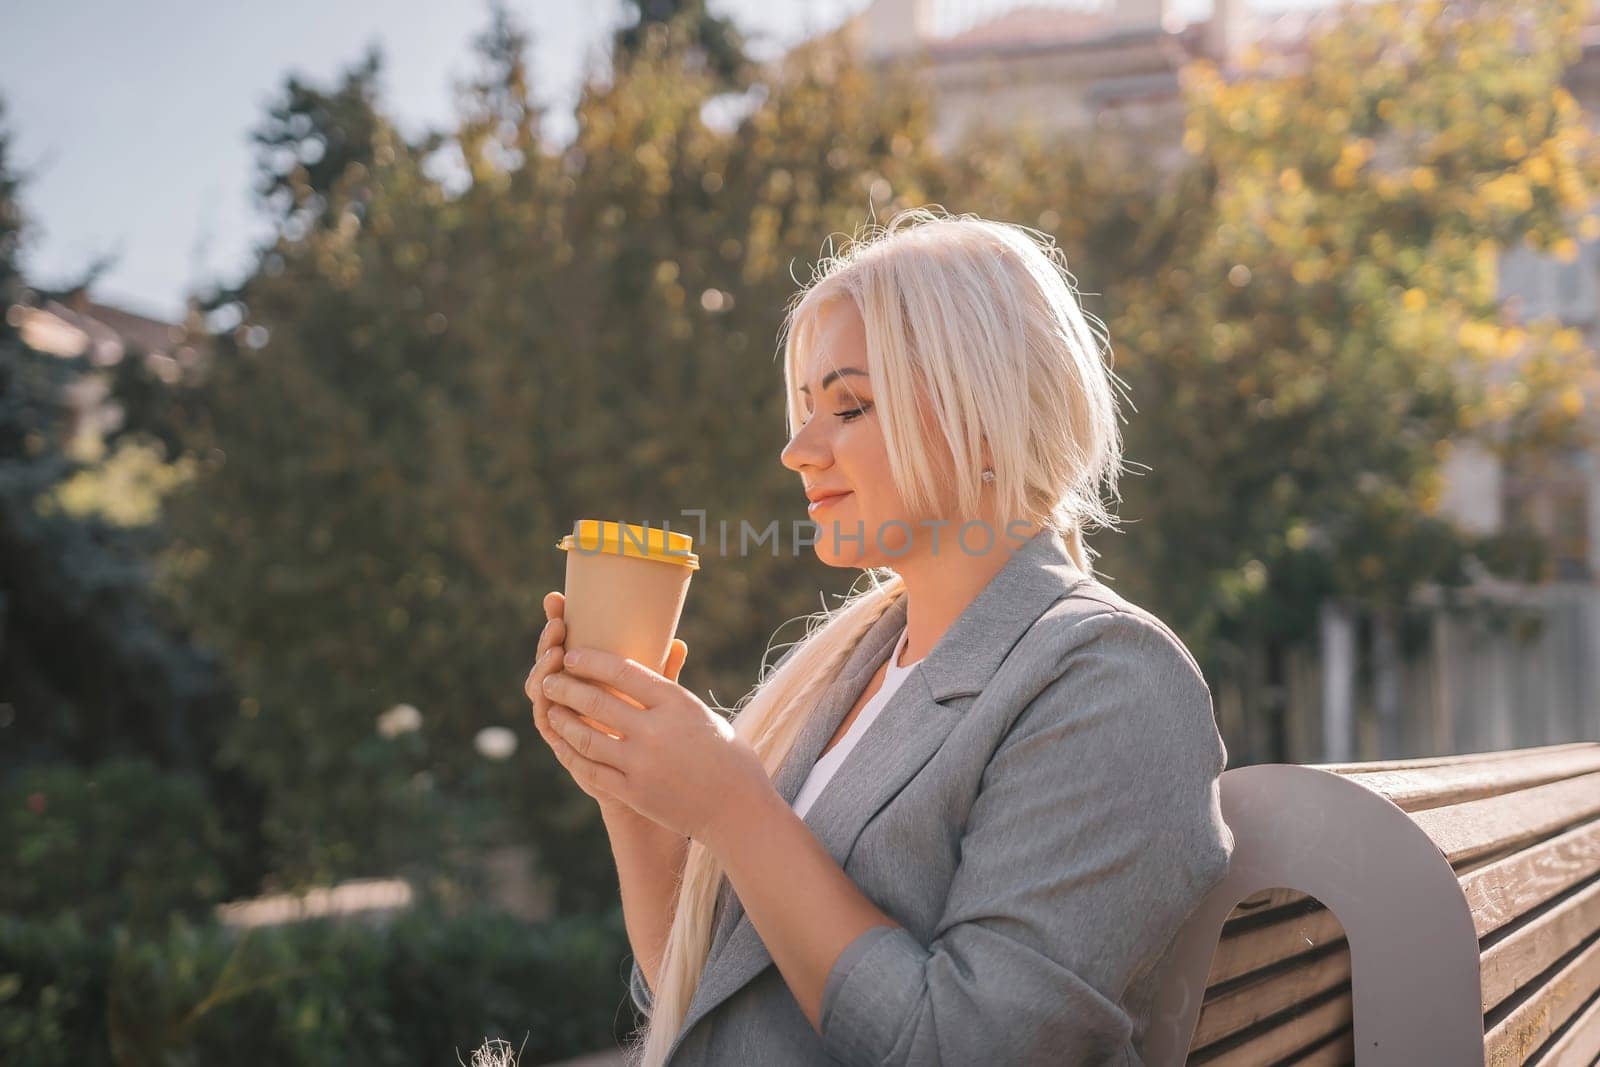 A blonde woman sits on a bench drinking coffee from a yellow cup. She is wearing a gray jacket and has her hair in a ponytail. The scene is peaceful and relaxing. by Matiunina